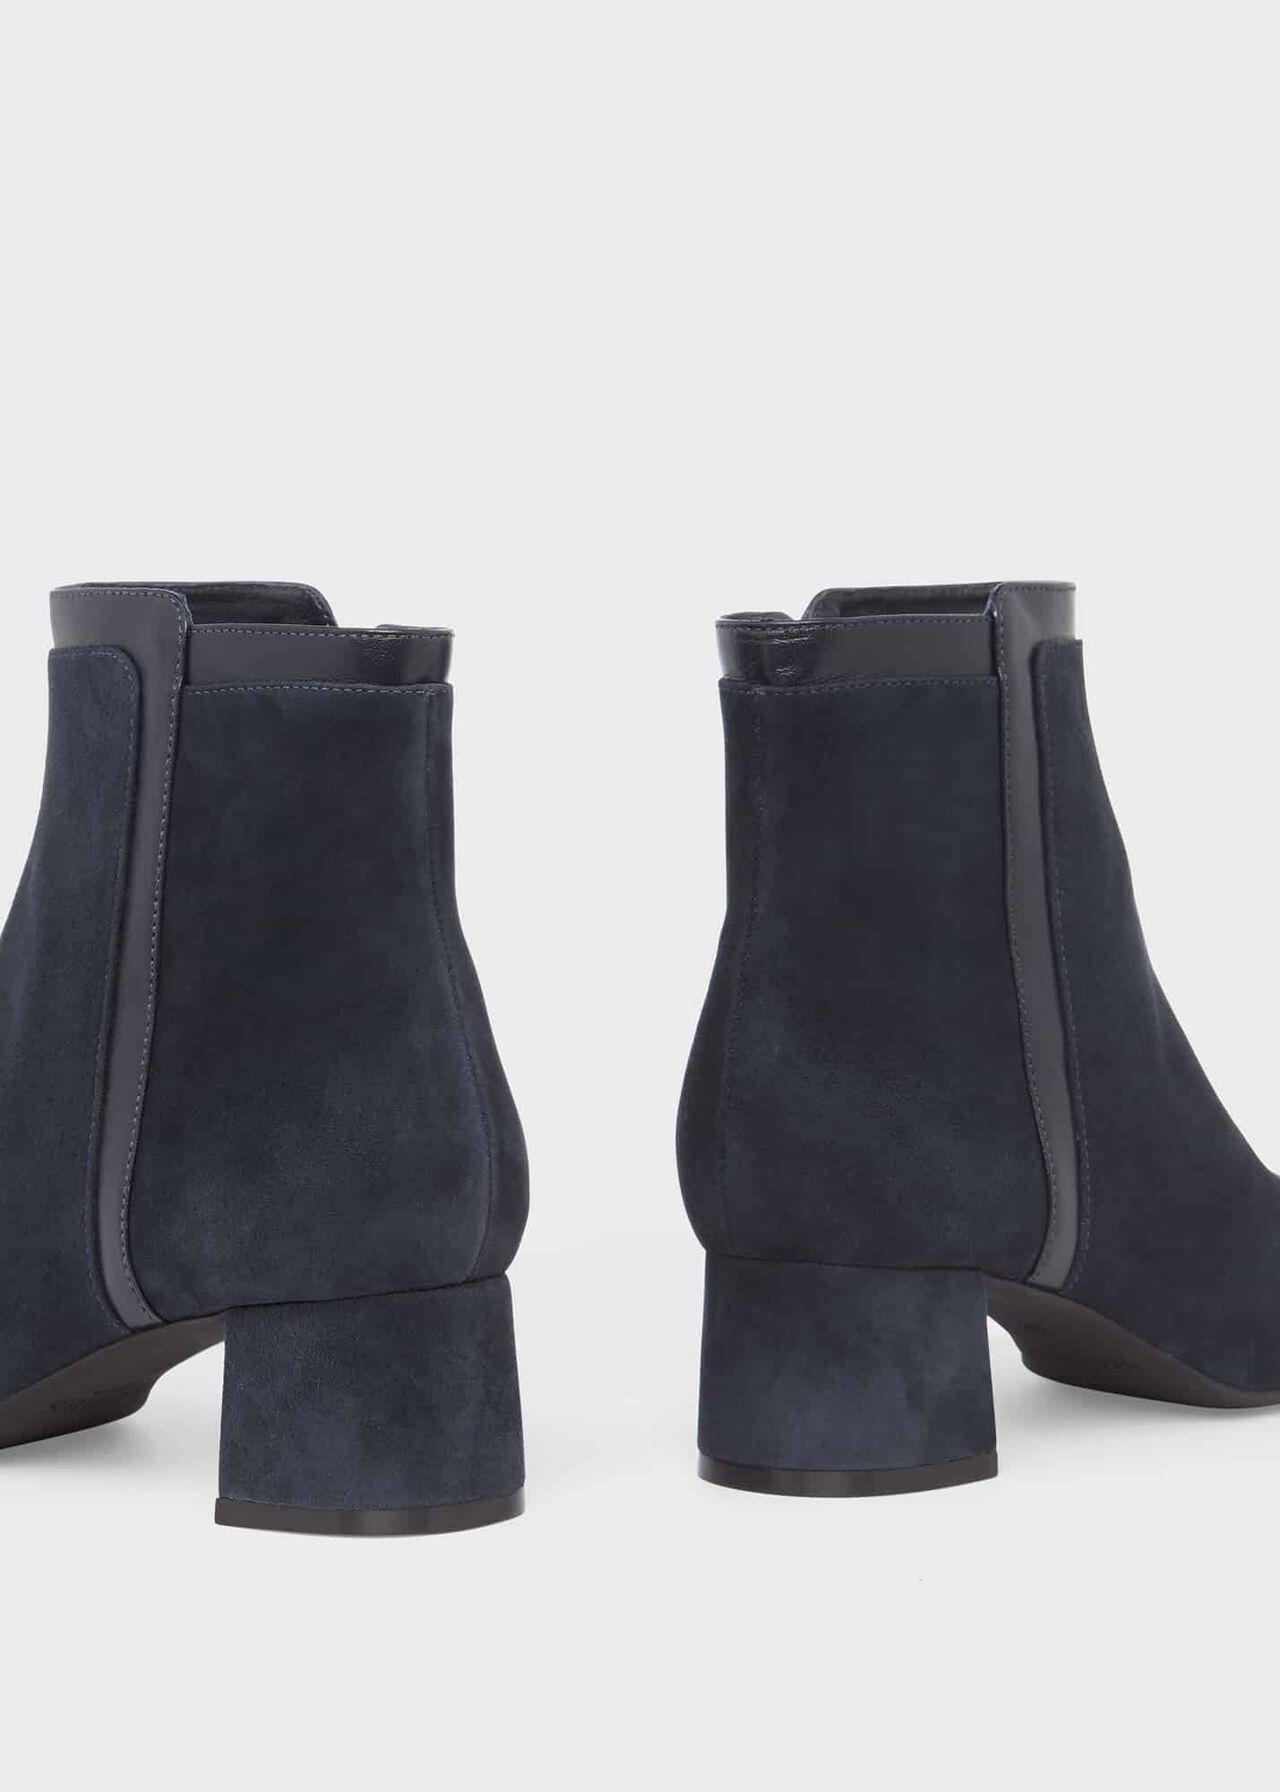 Iro Suede Ankle Boots, Navy, hi-res